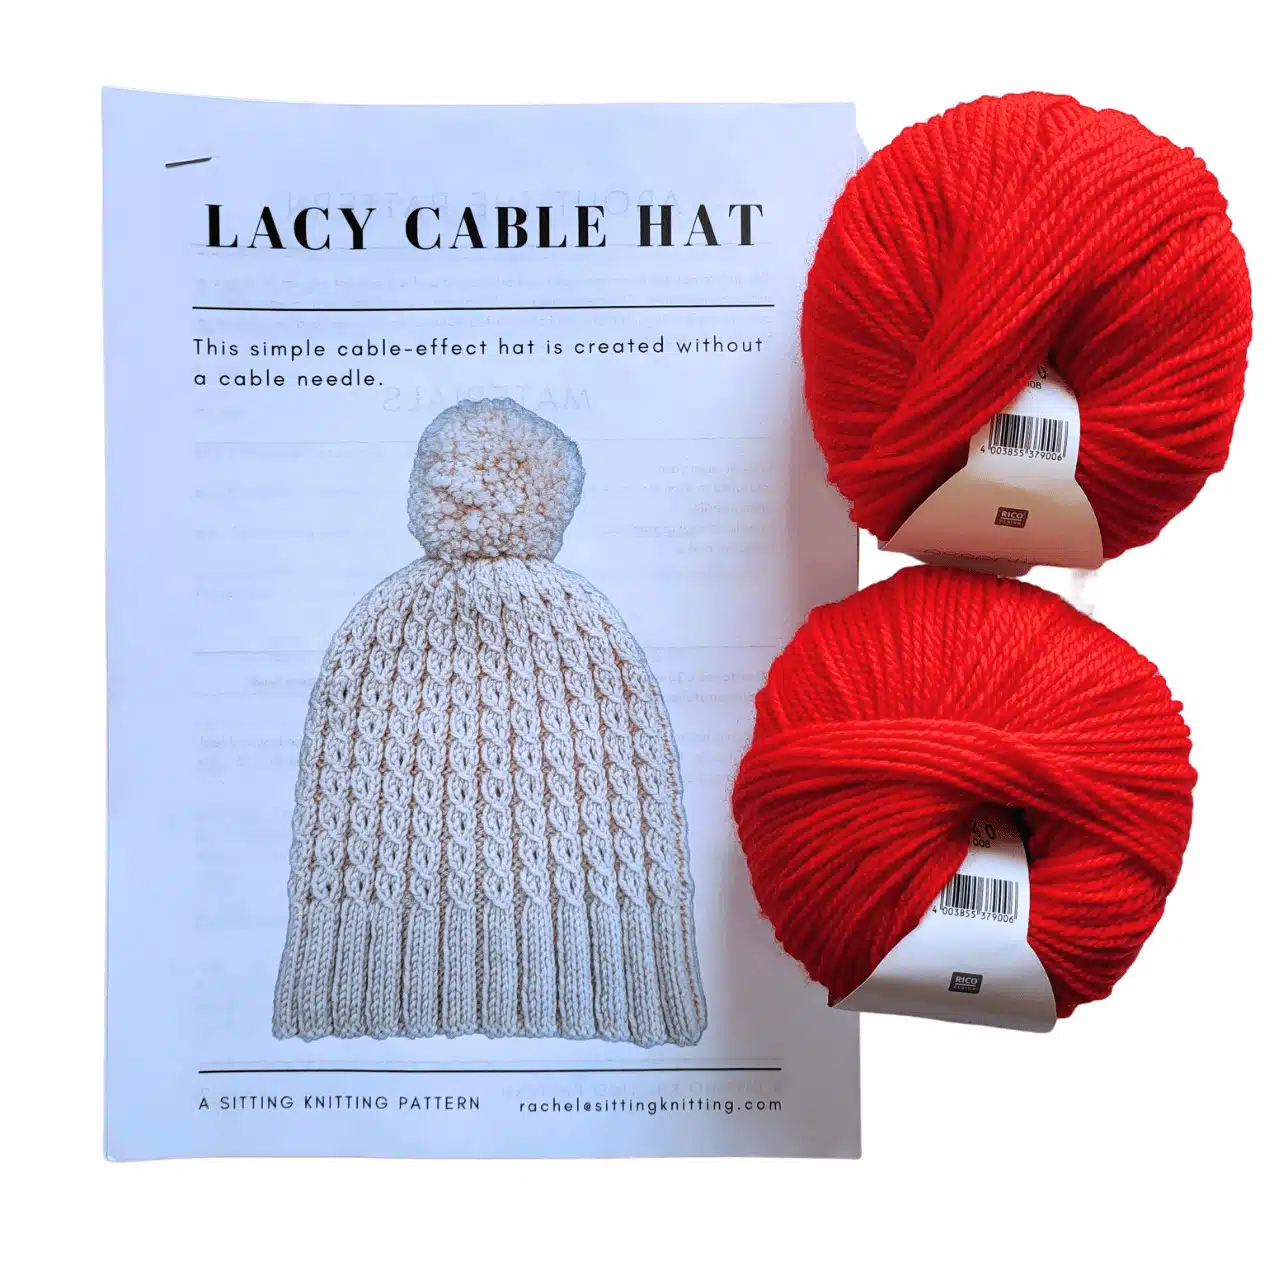 Sitting Knitting kits - lacy cable hat - kit